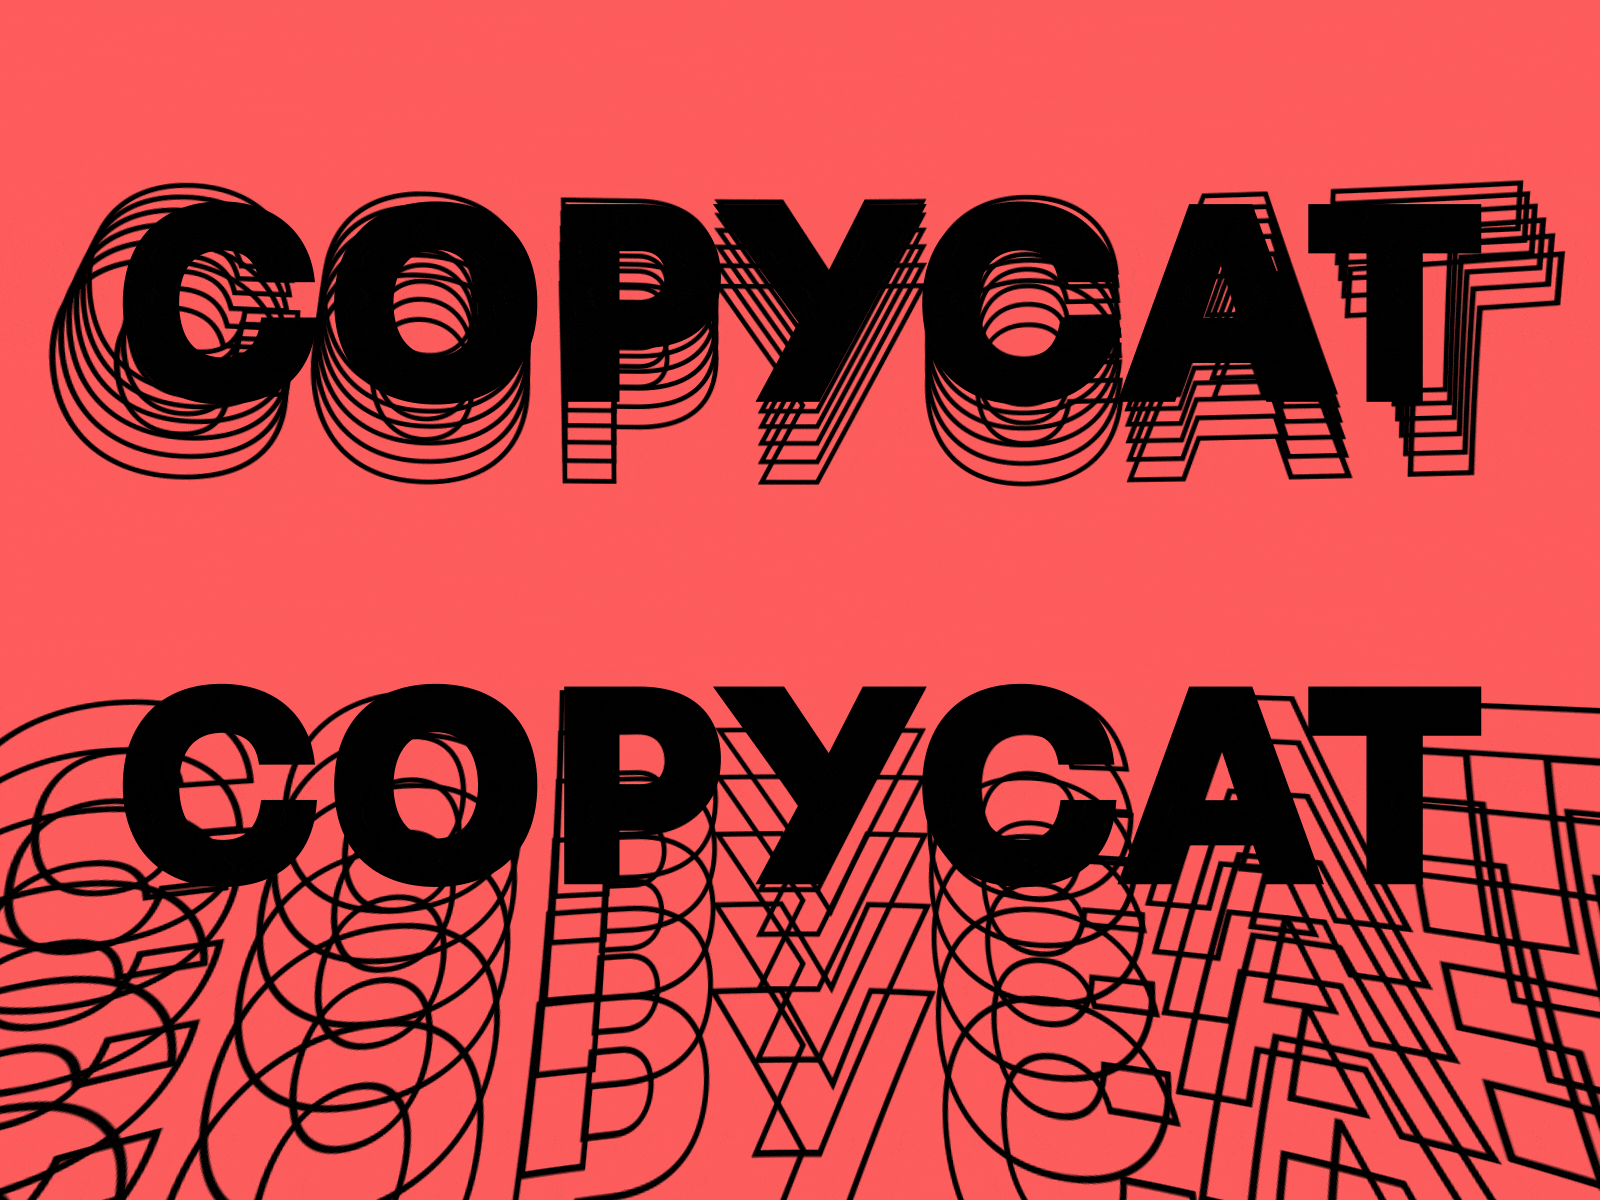 Copycat after effects copycat distortion echo experiment motion design motion graphic typography